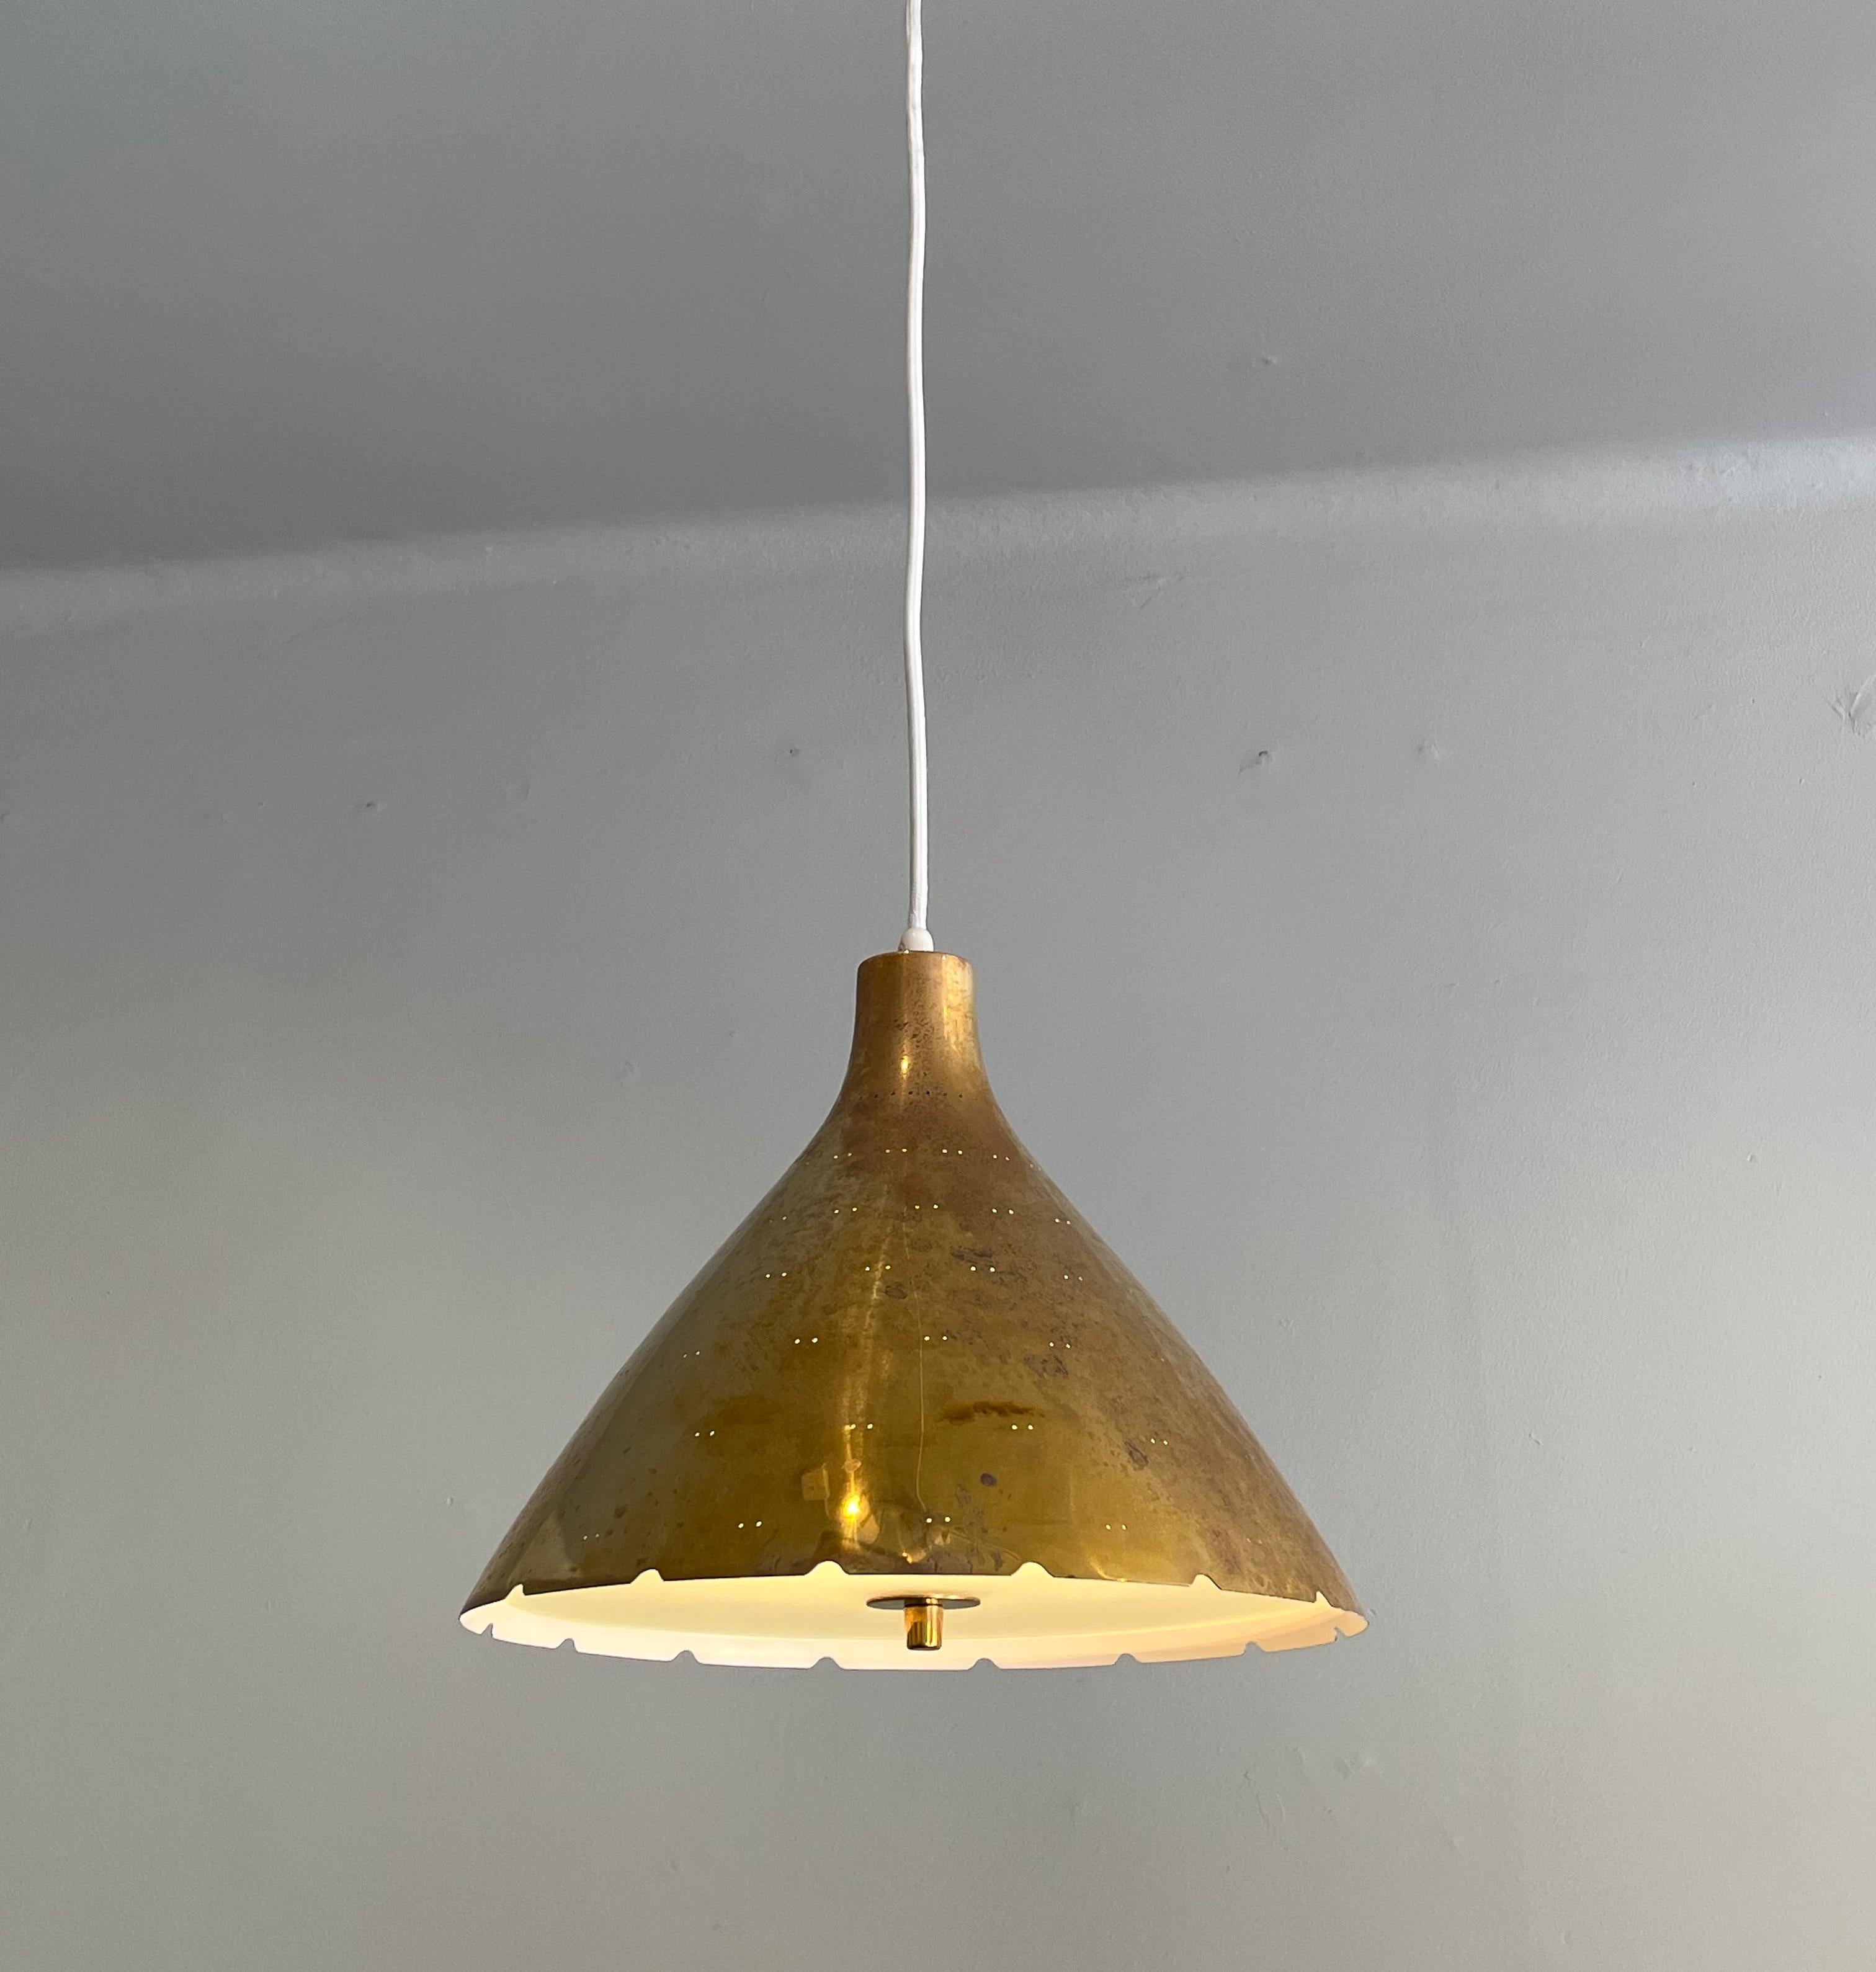 Scandinavian Modern Paavo Tynell Pendant Lamp K2-46 by Taito Oy, Finland, 1950s For Sale